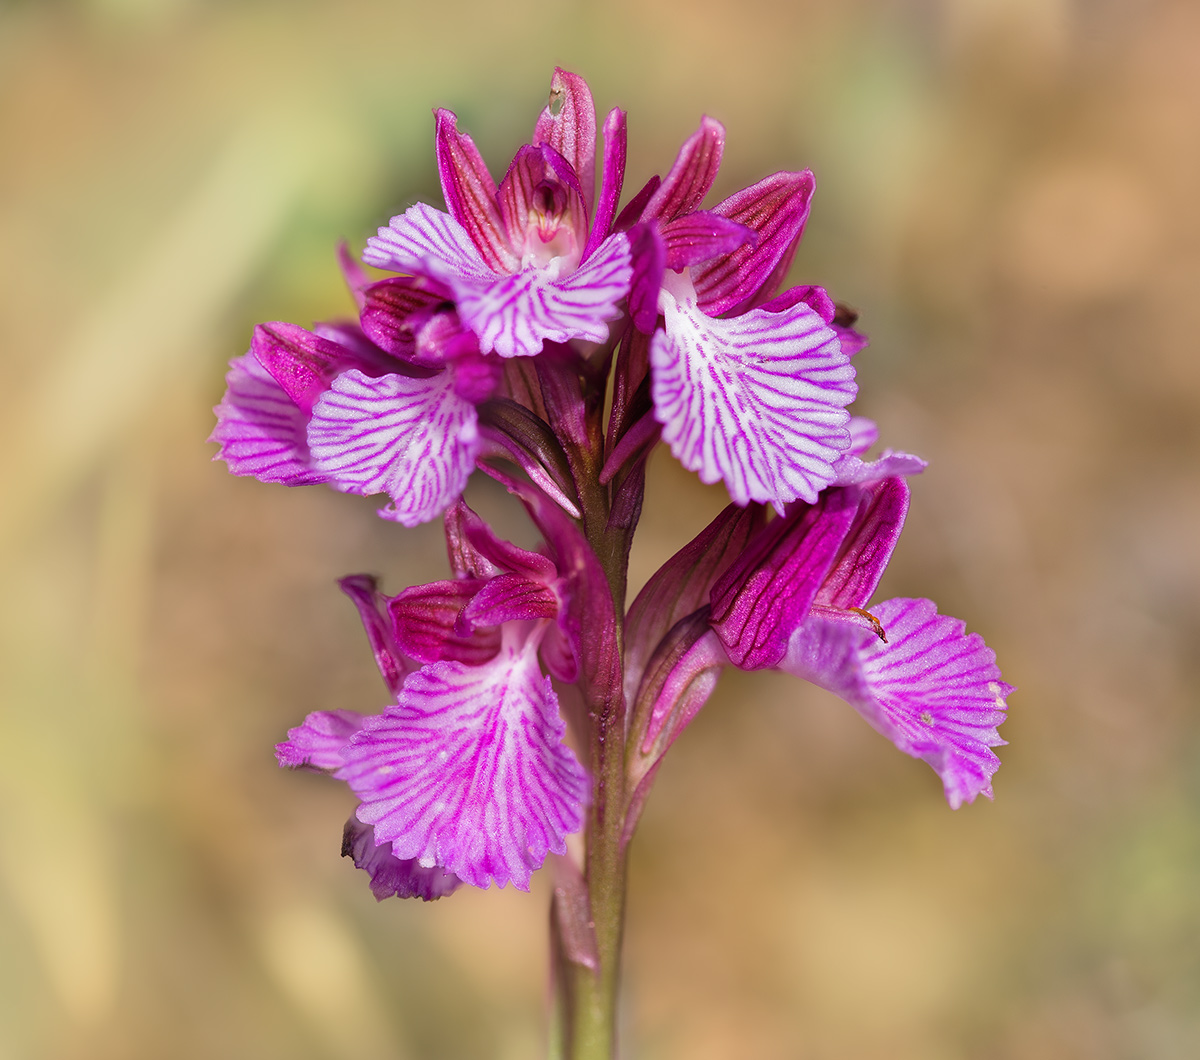 Orchis Papilionacea Stack 15 frames with Helicon Focus...